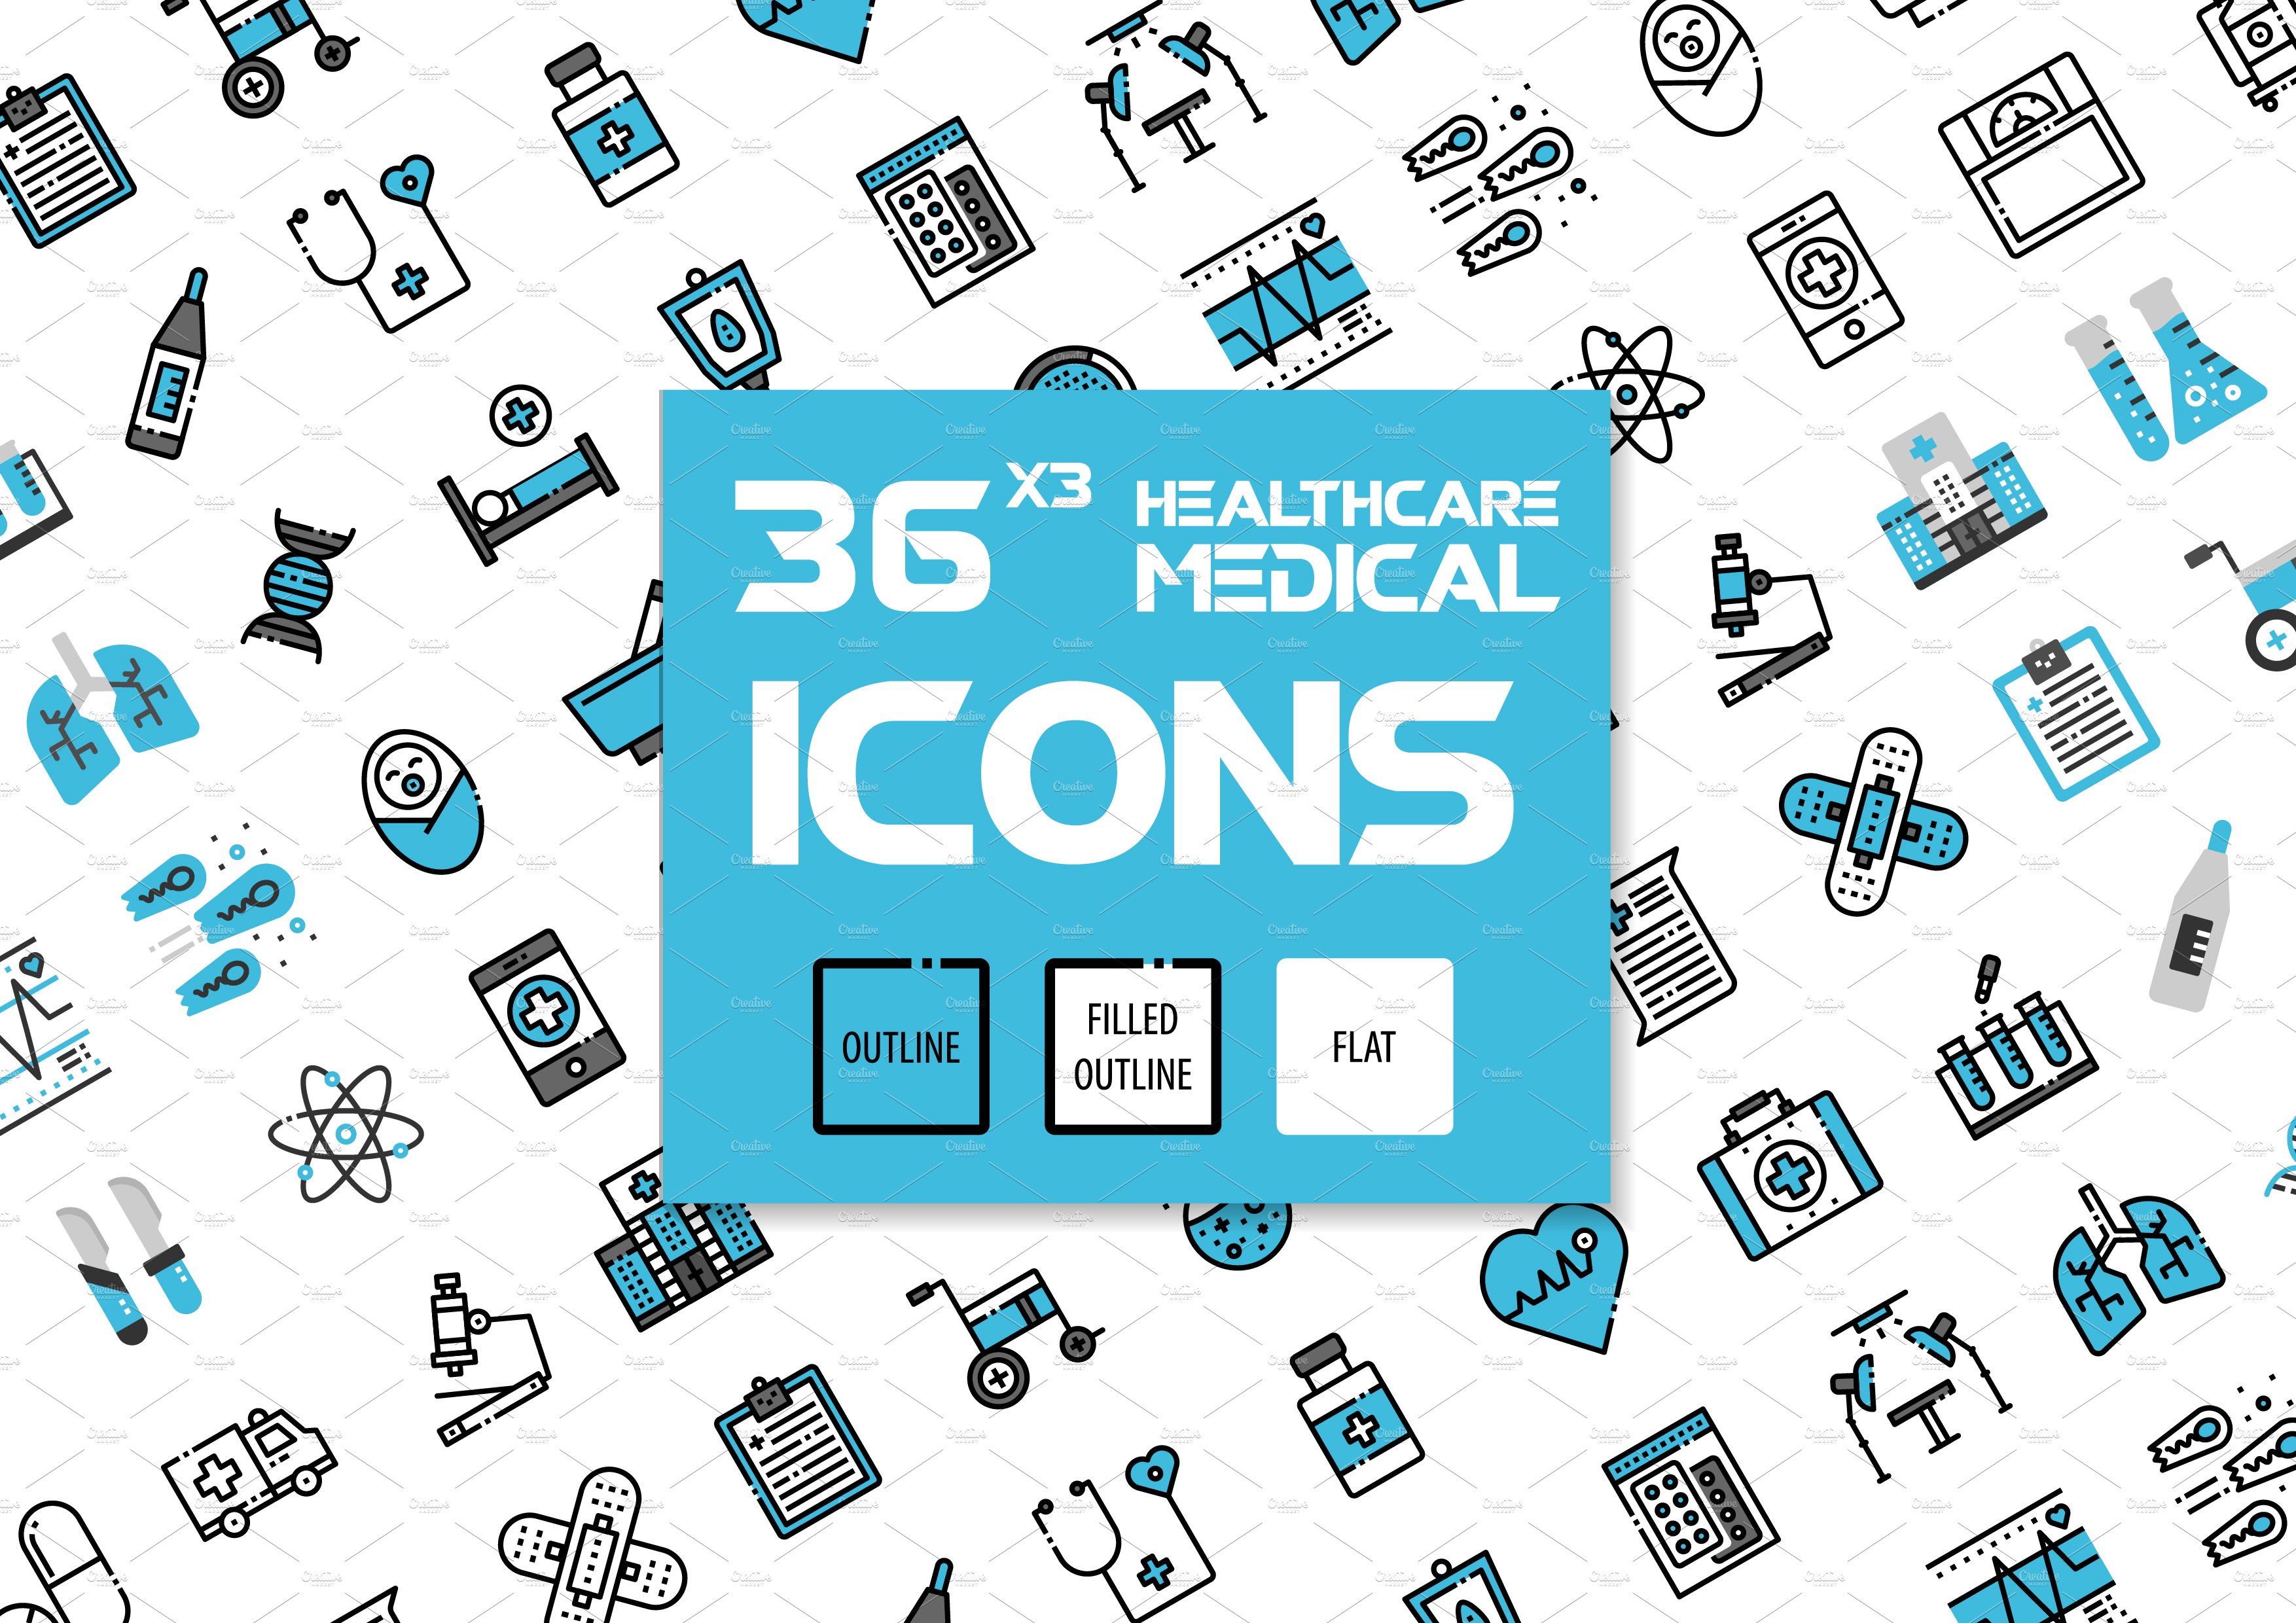 36x3 Healthcare & Medical icons cover image.